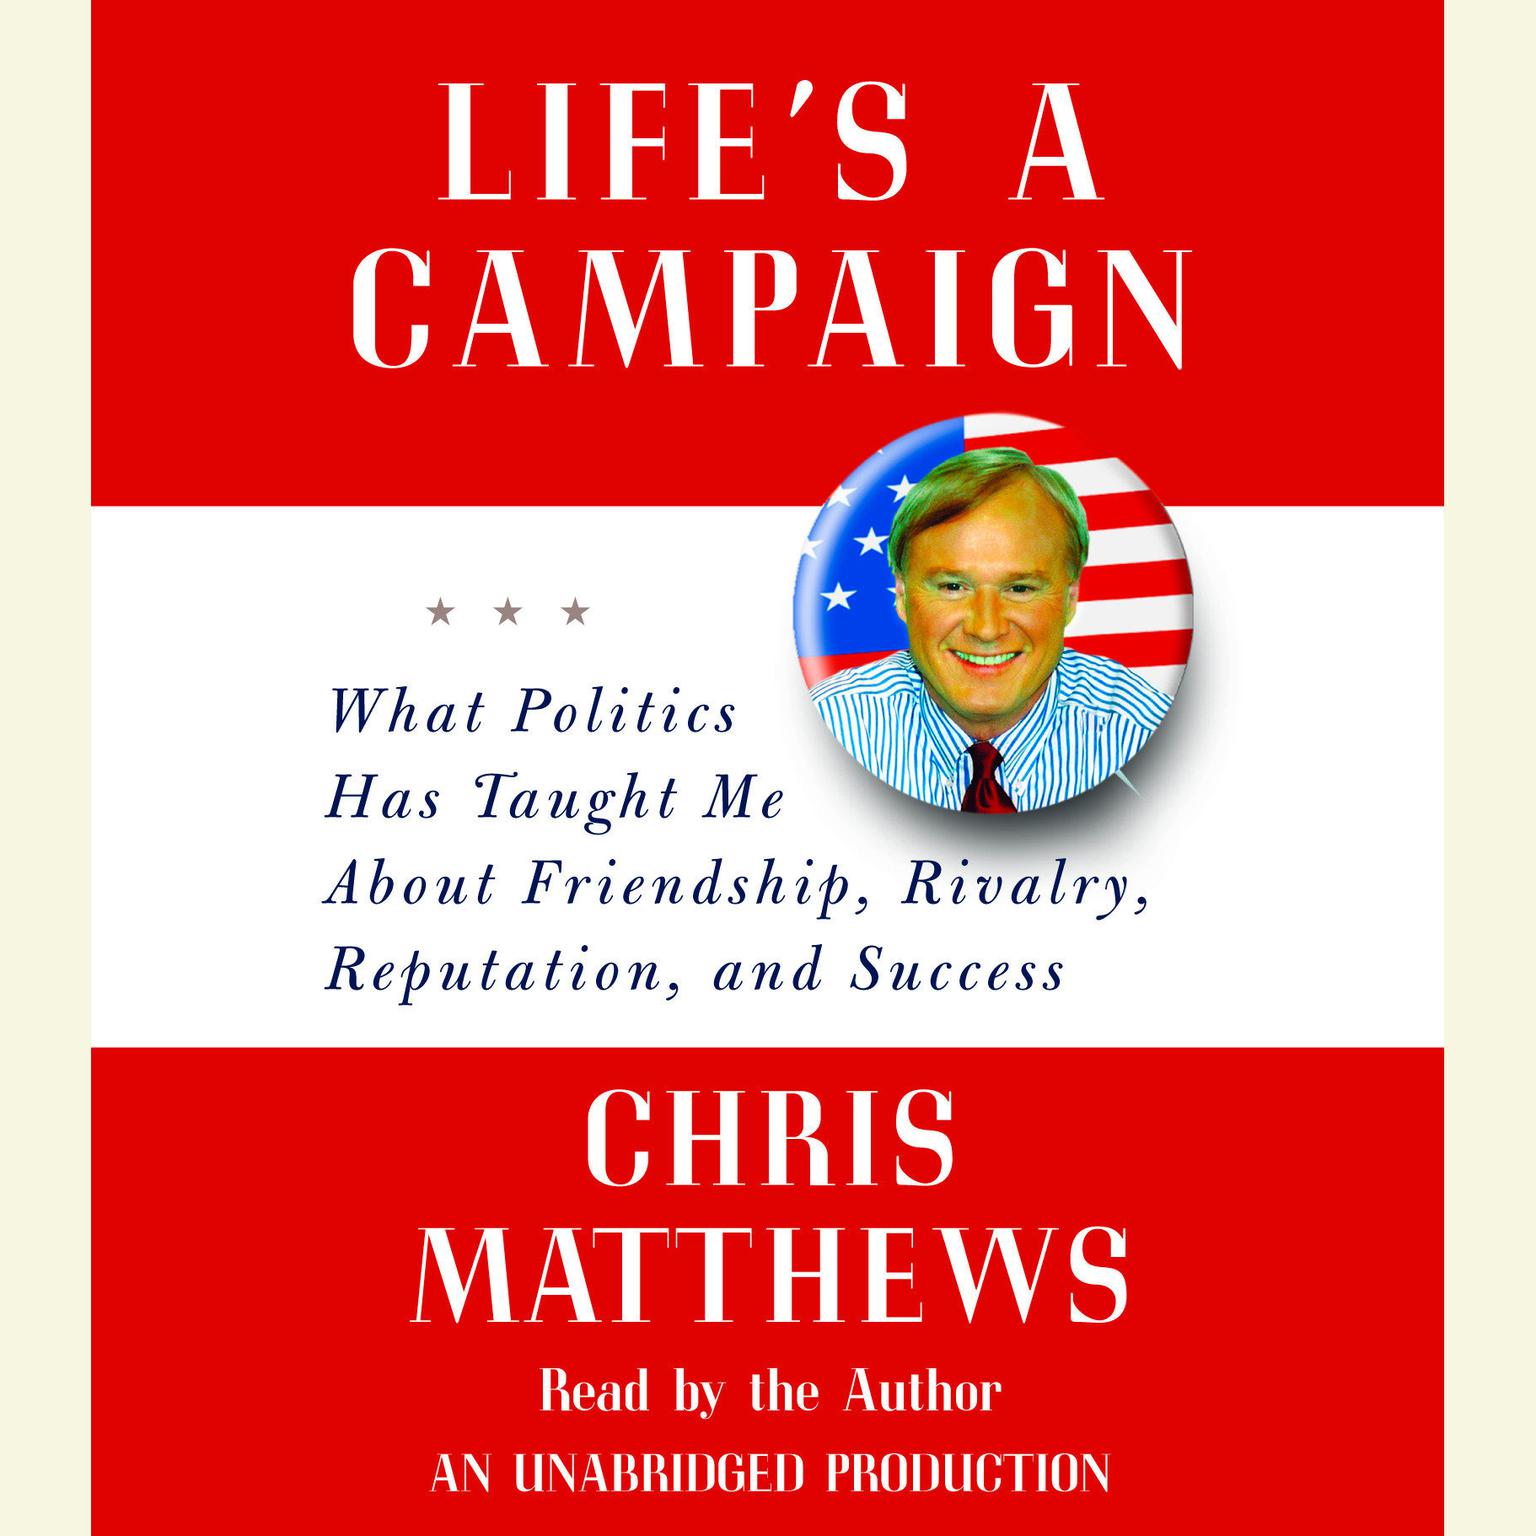 Lifes a Campaign: What Politics Has Taught Me About Friendship, Rivalry, Reputation, and Success Audiobook, by Chris Matthews